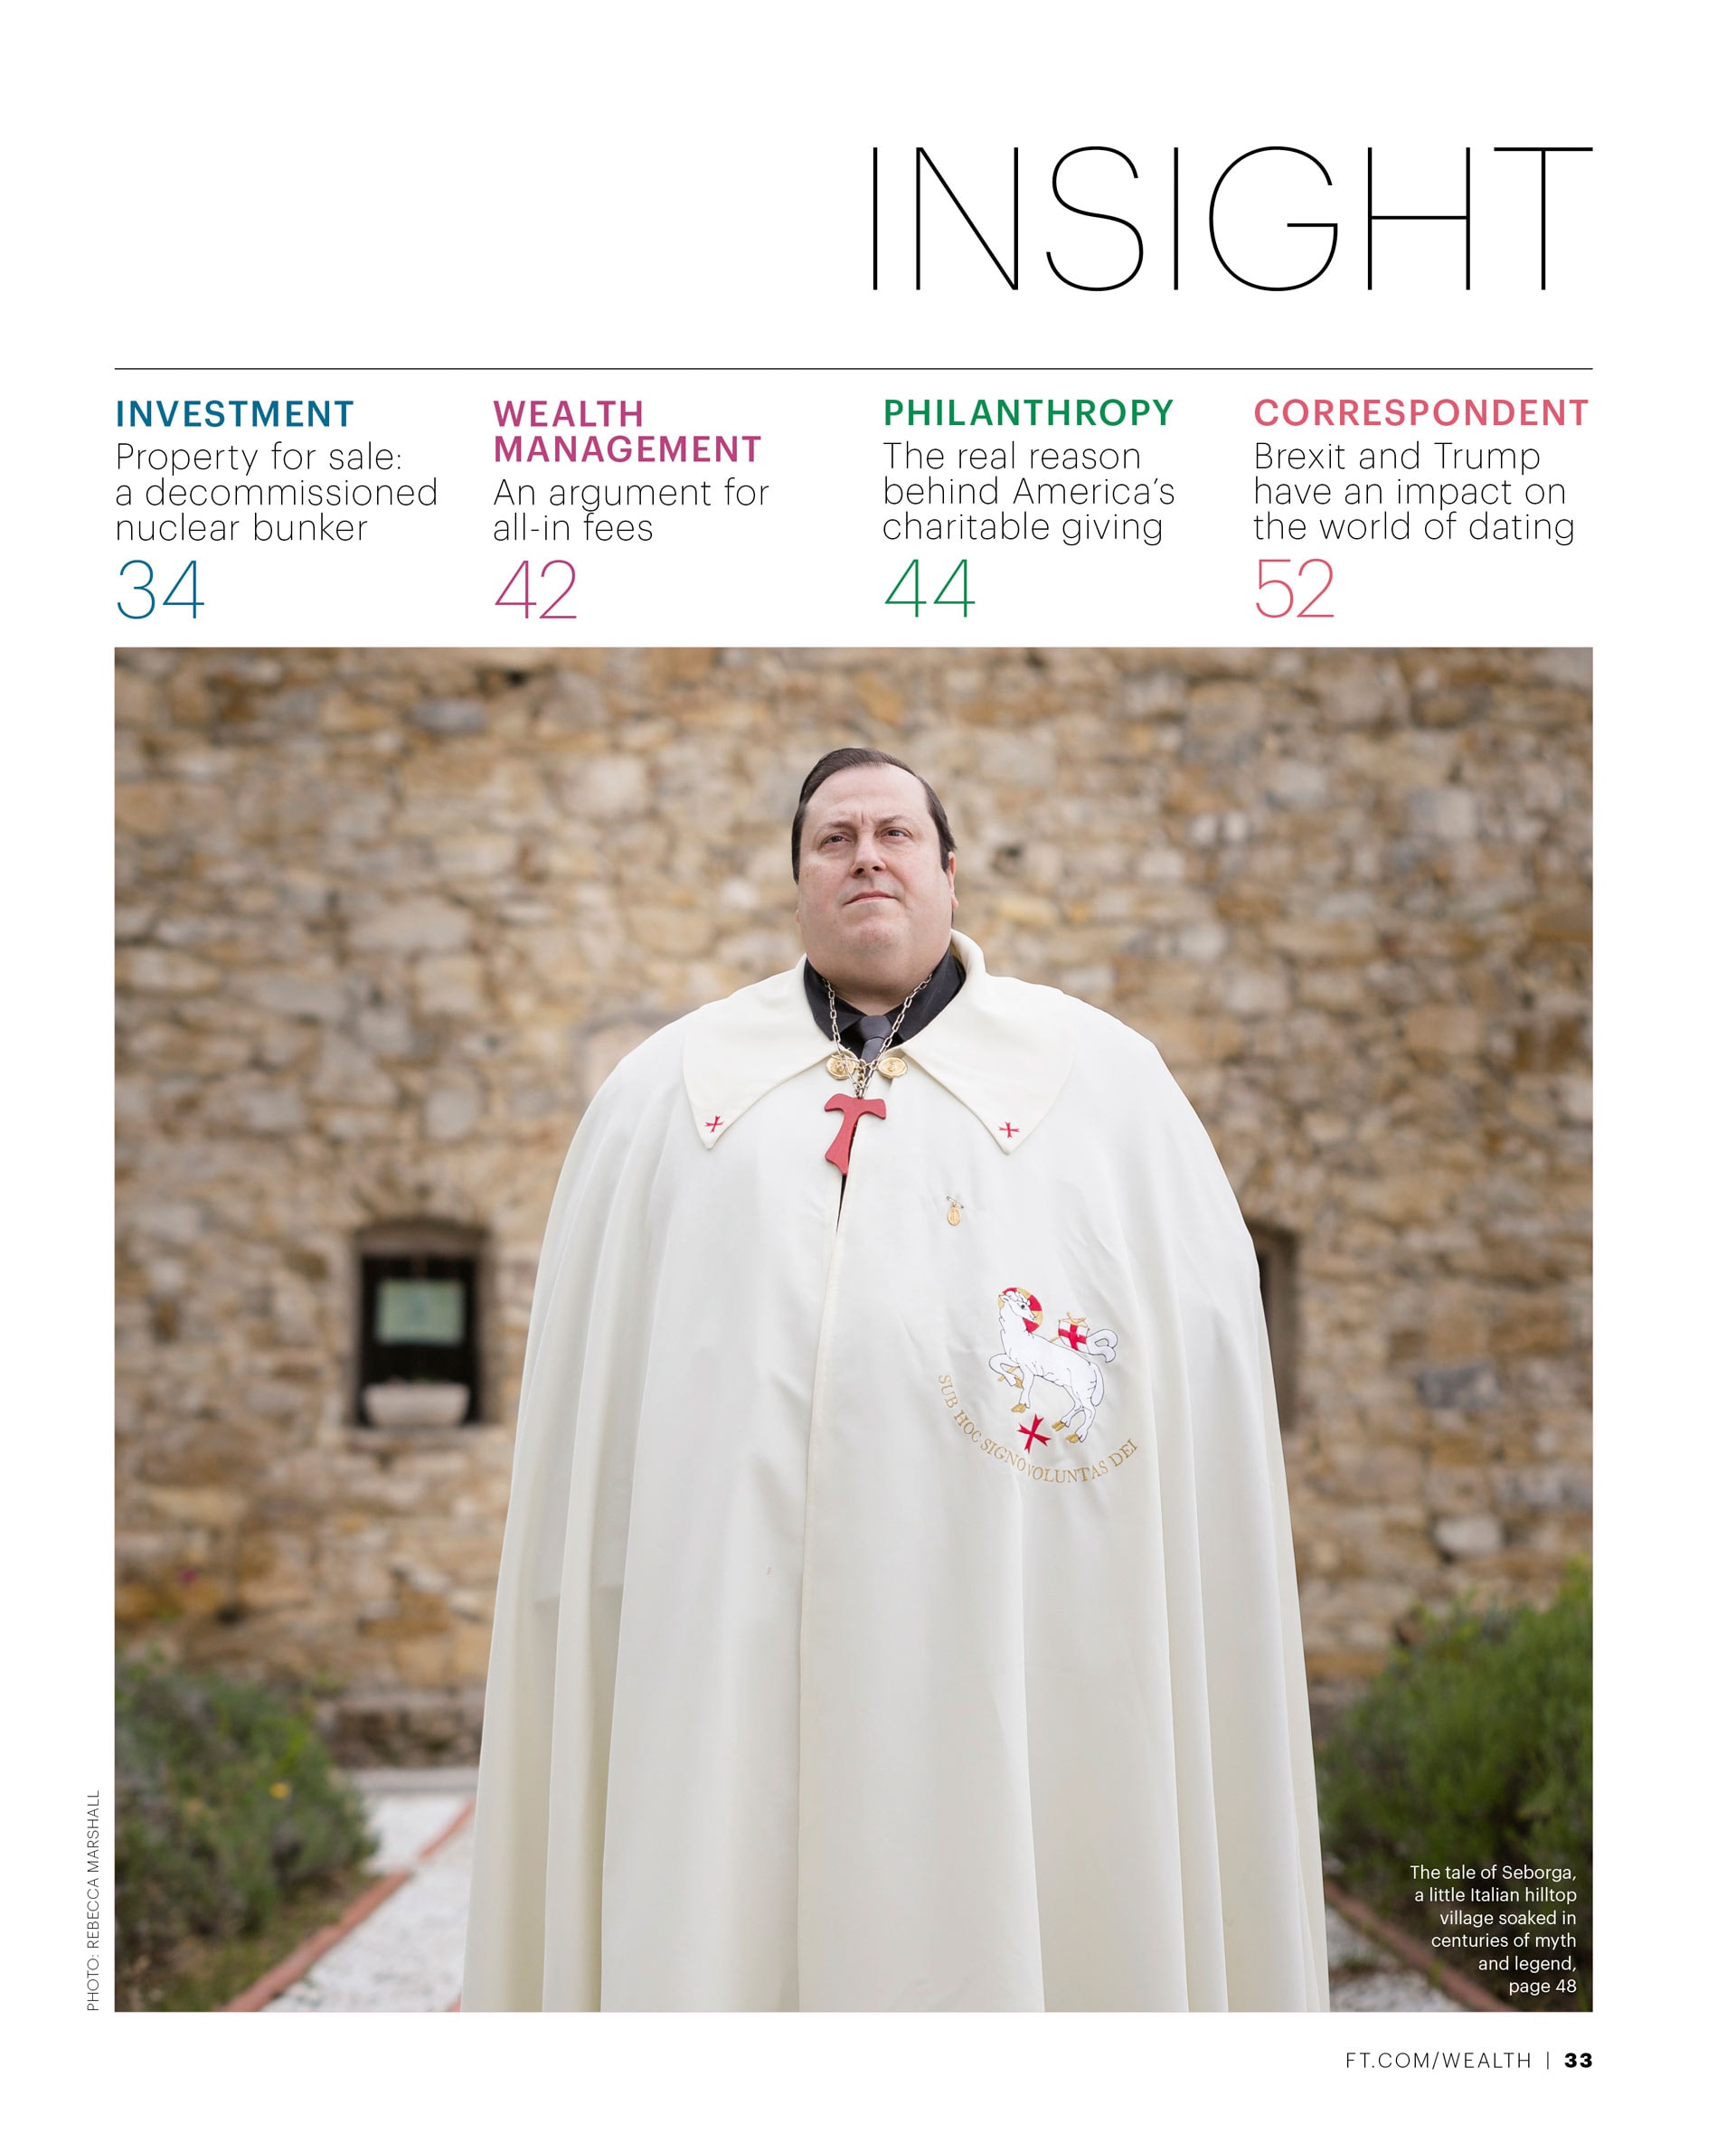 Magazine cover showing a portrait of a man standing in white robes